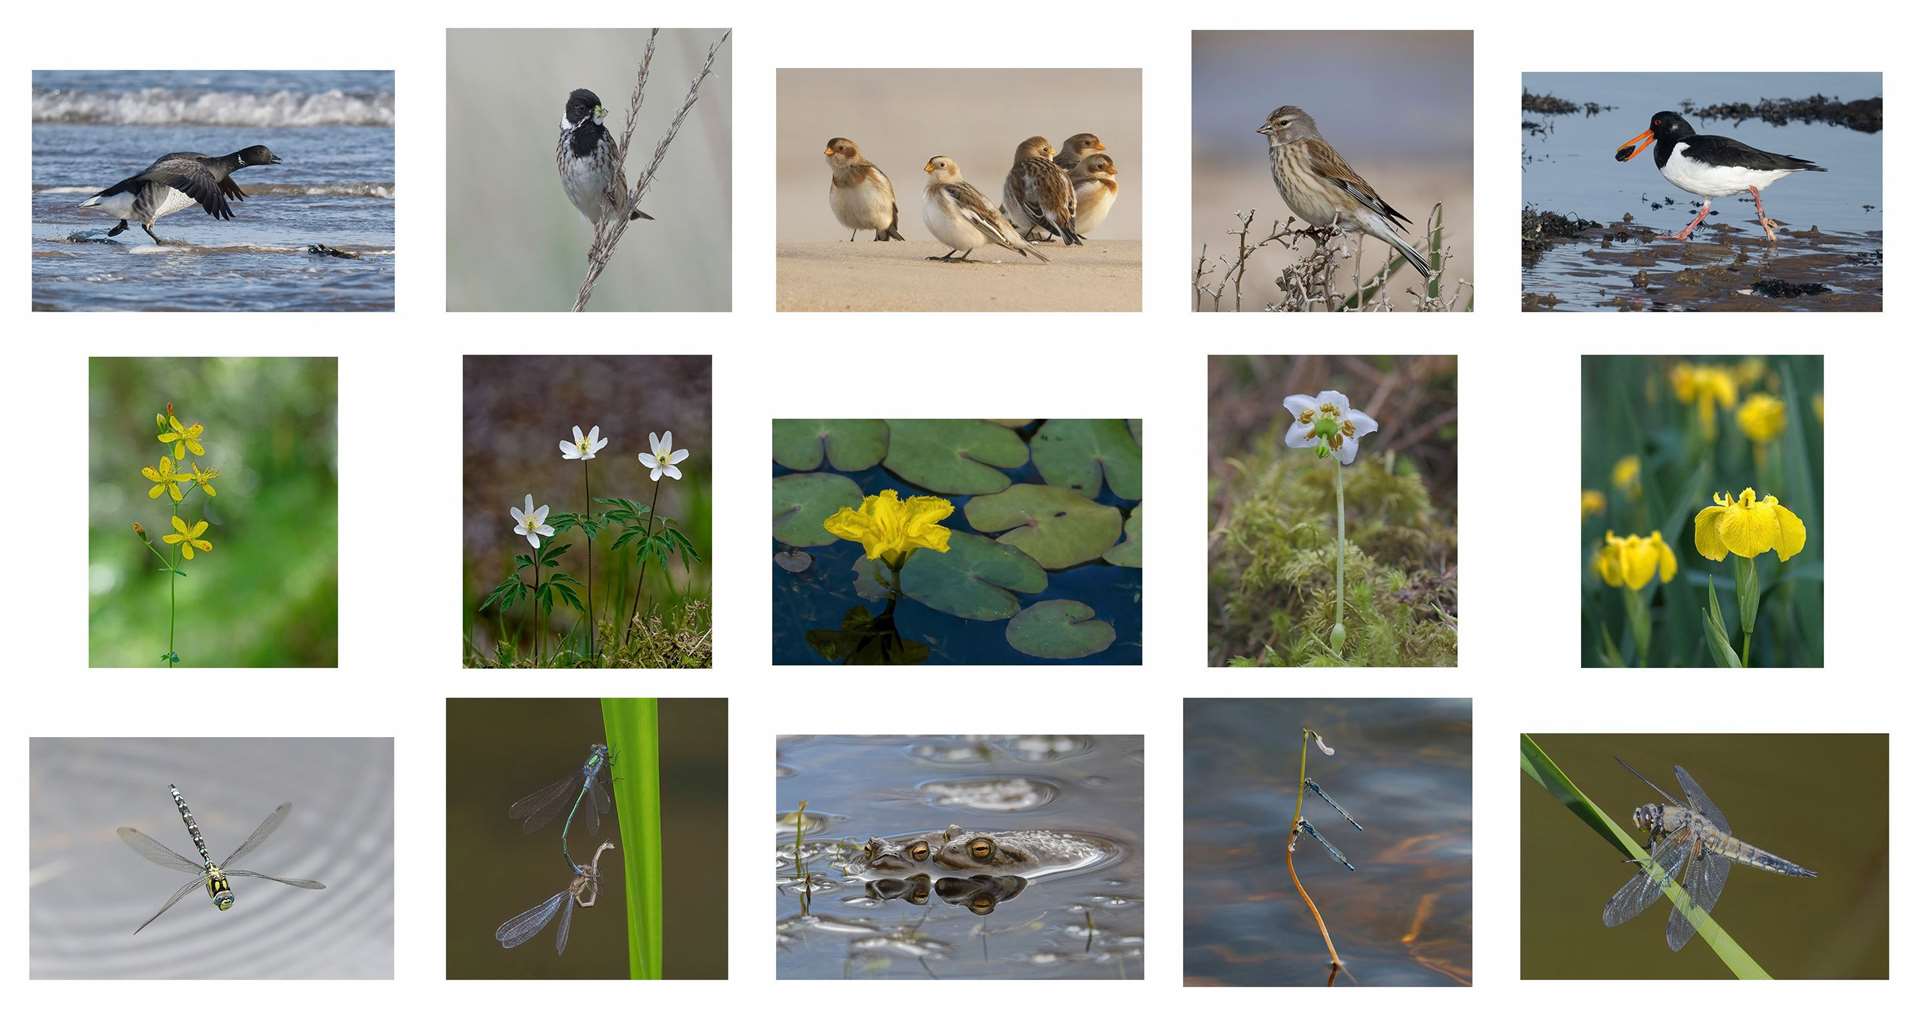 The stunning panel of images. Top row from left: Brent goose, reed bunting, snow buntings, linnet, oystercatcher. Second Row: Common St John’s wort, wood anemone, fringed water lily, one-flowered wintergreen, flag iris.Bottom row: southern hawker dragonfly, emerald damselfly, common frog, common blue damselfly, four-spotted chaser dragonfly."